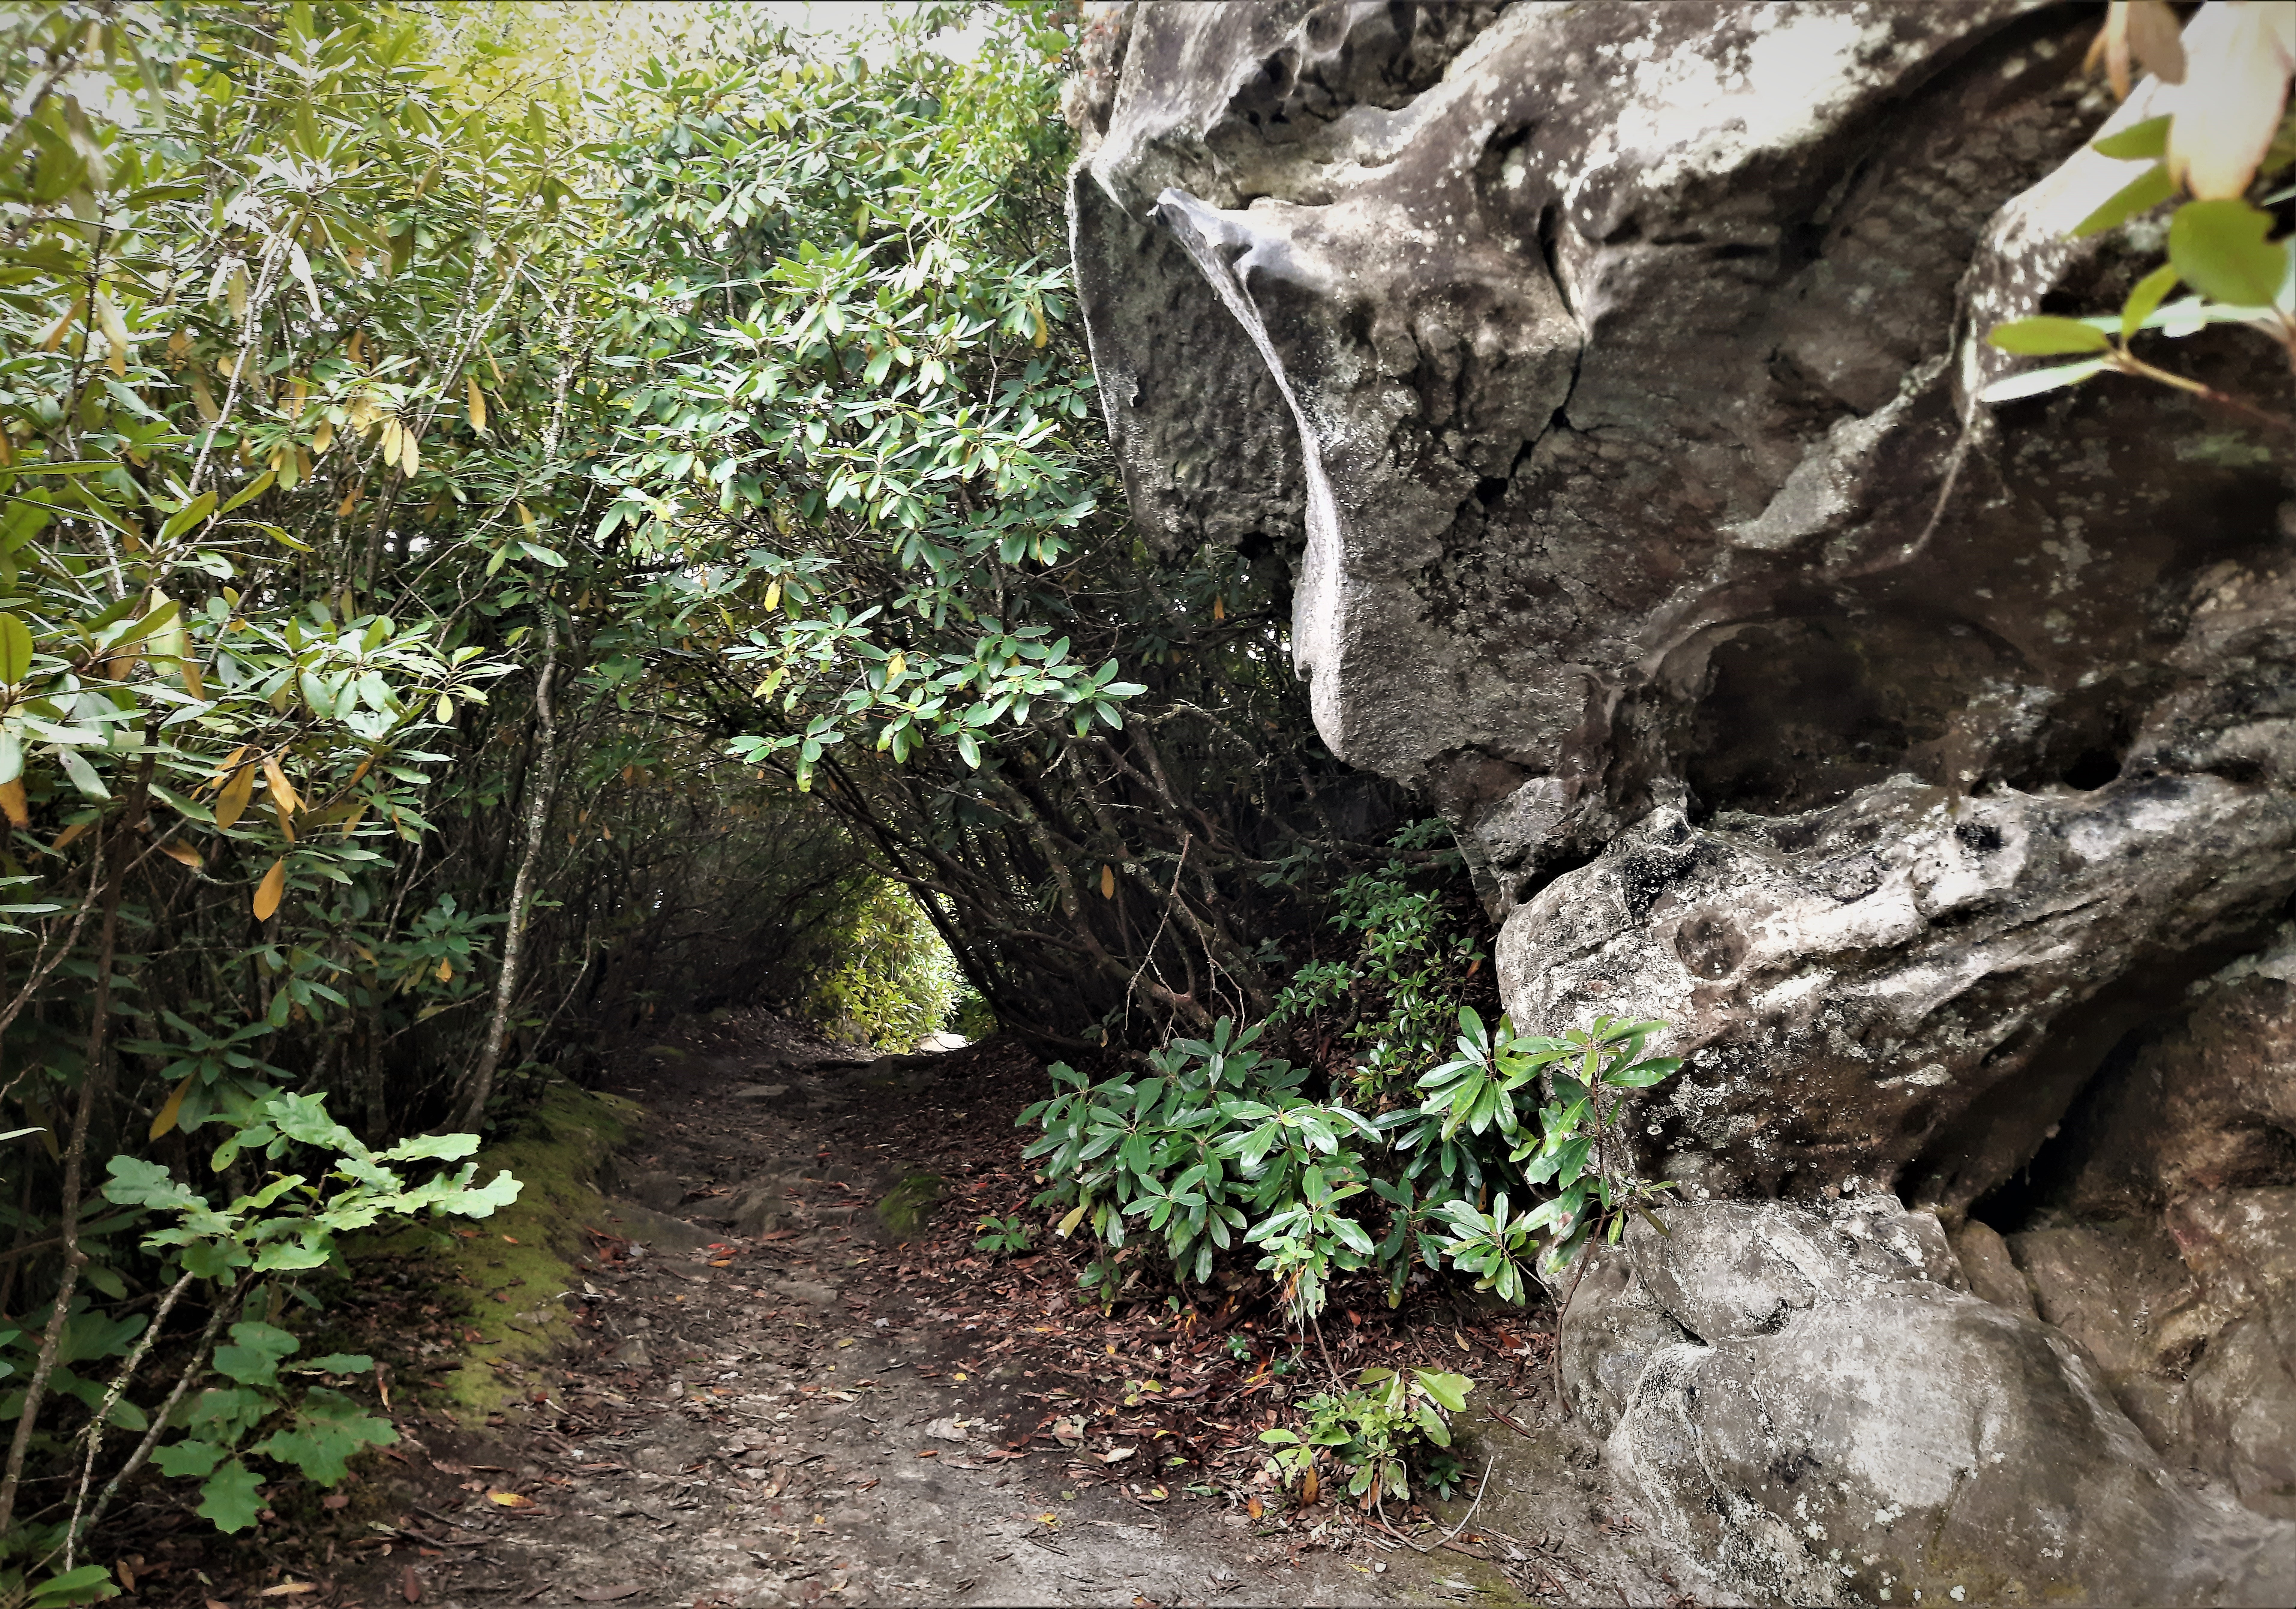 Go back down through the tunnel of rhododendron.